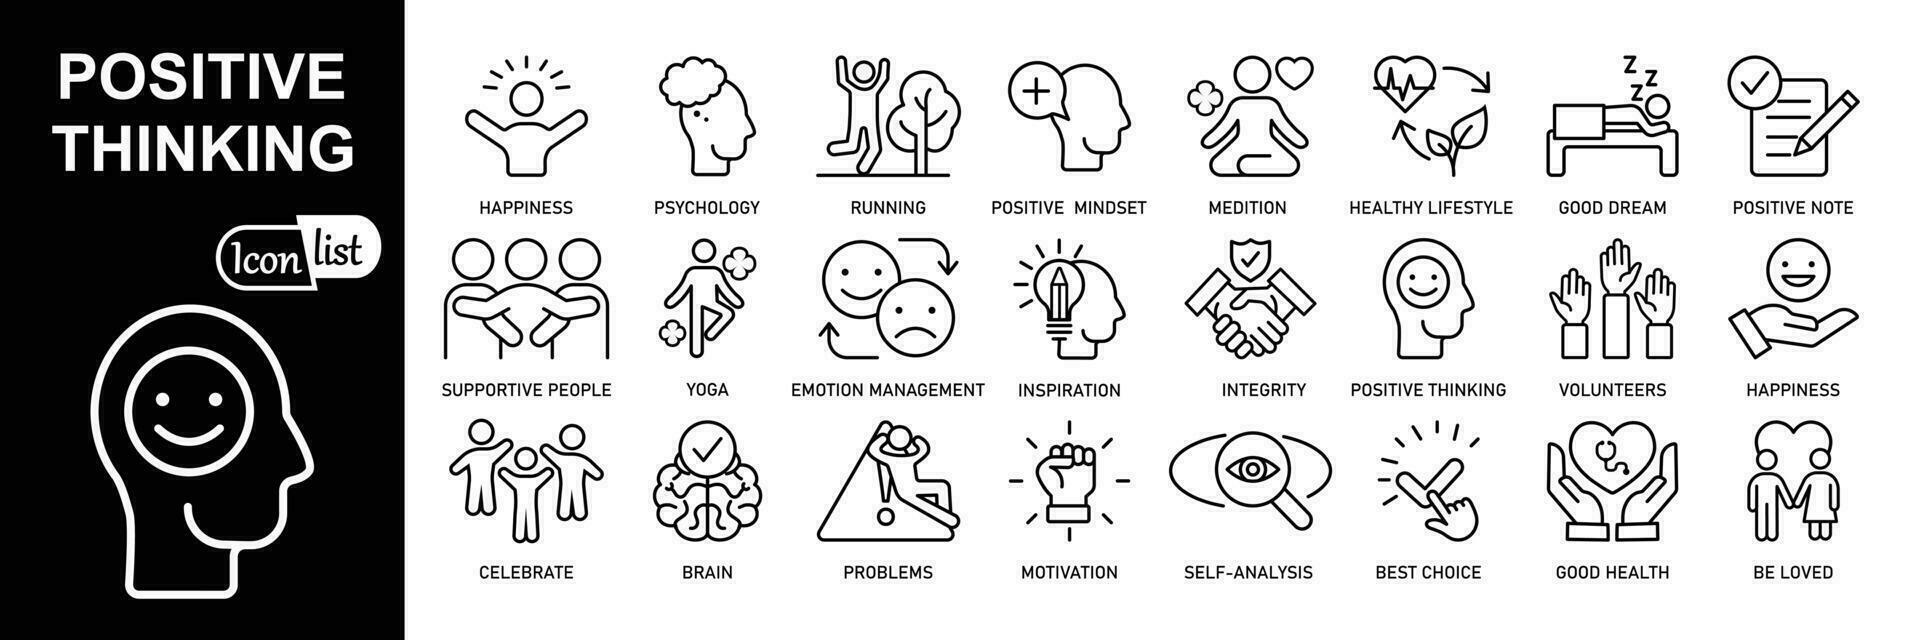 Positive thinking linear icons set .Emotion Management, Healthy Lifestyle, Confidence, Imagination, Good Dream, Yoga, Meditation. simple outline icons. vector